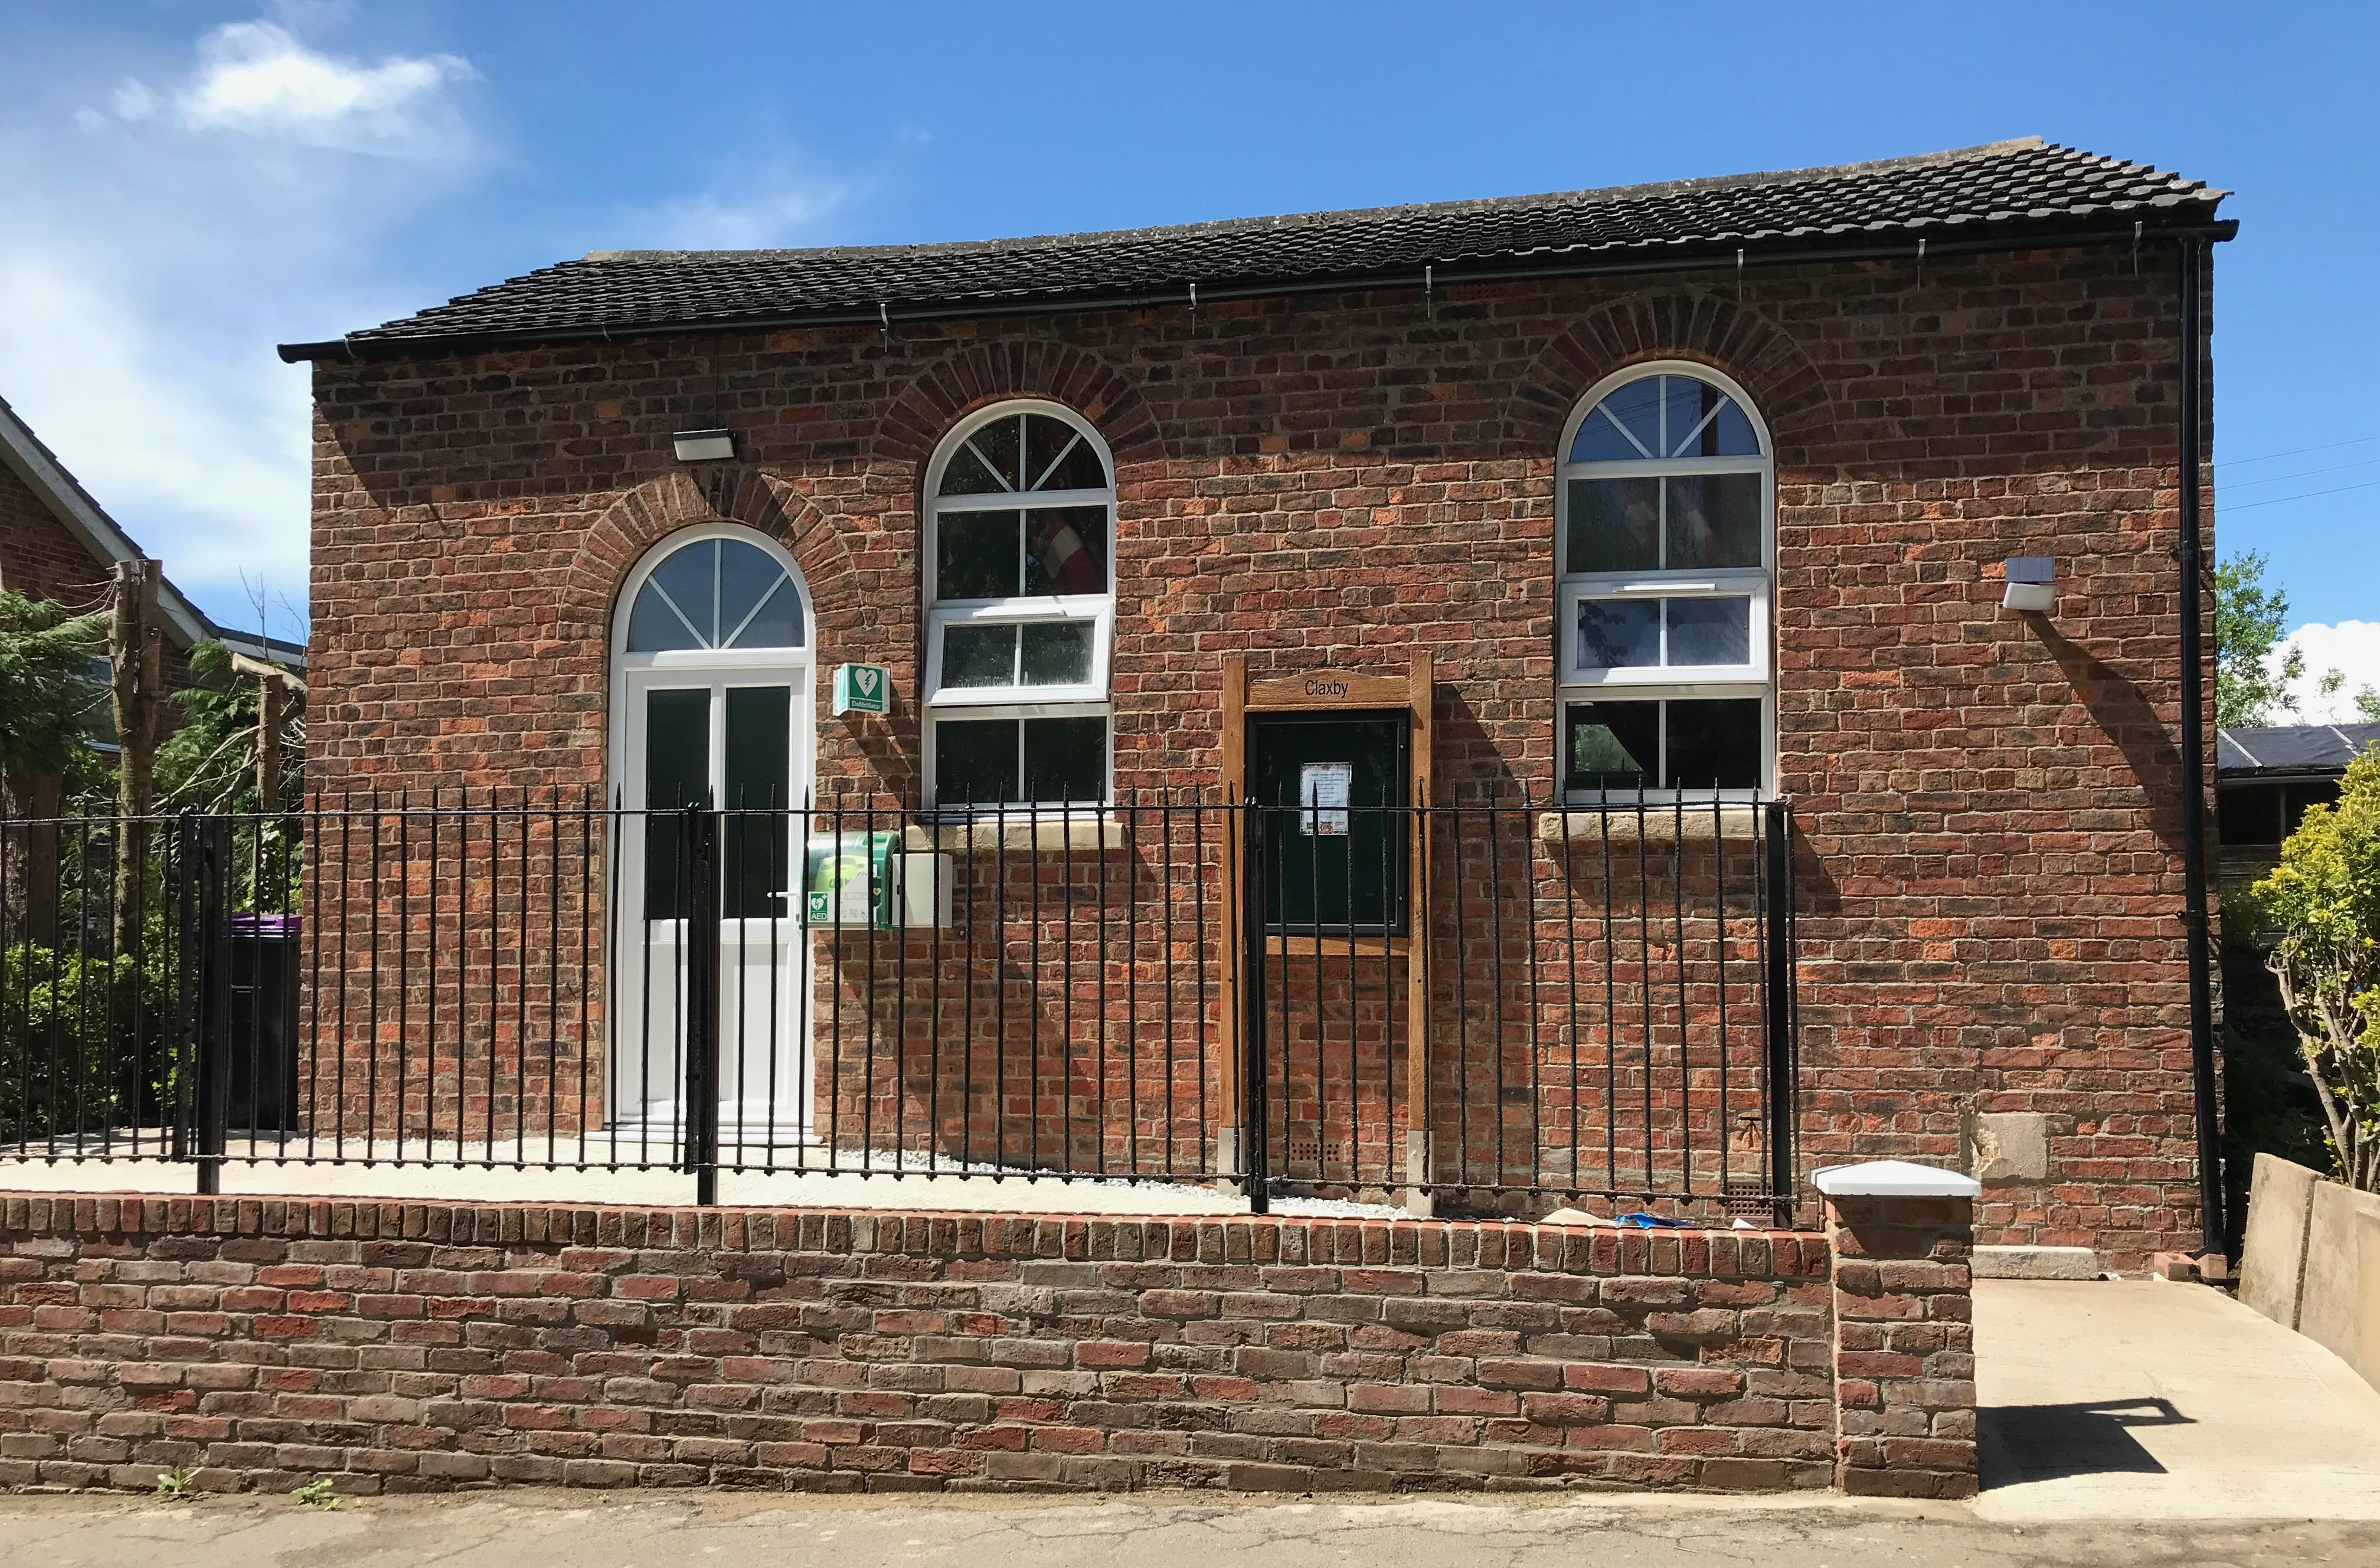 New village hall picture